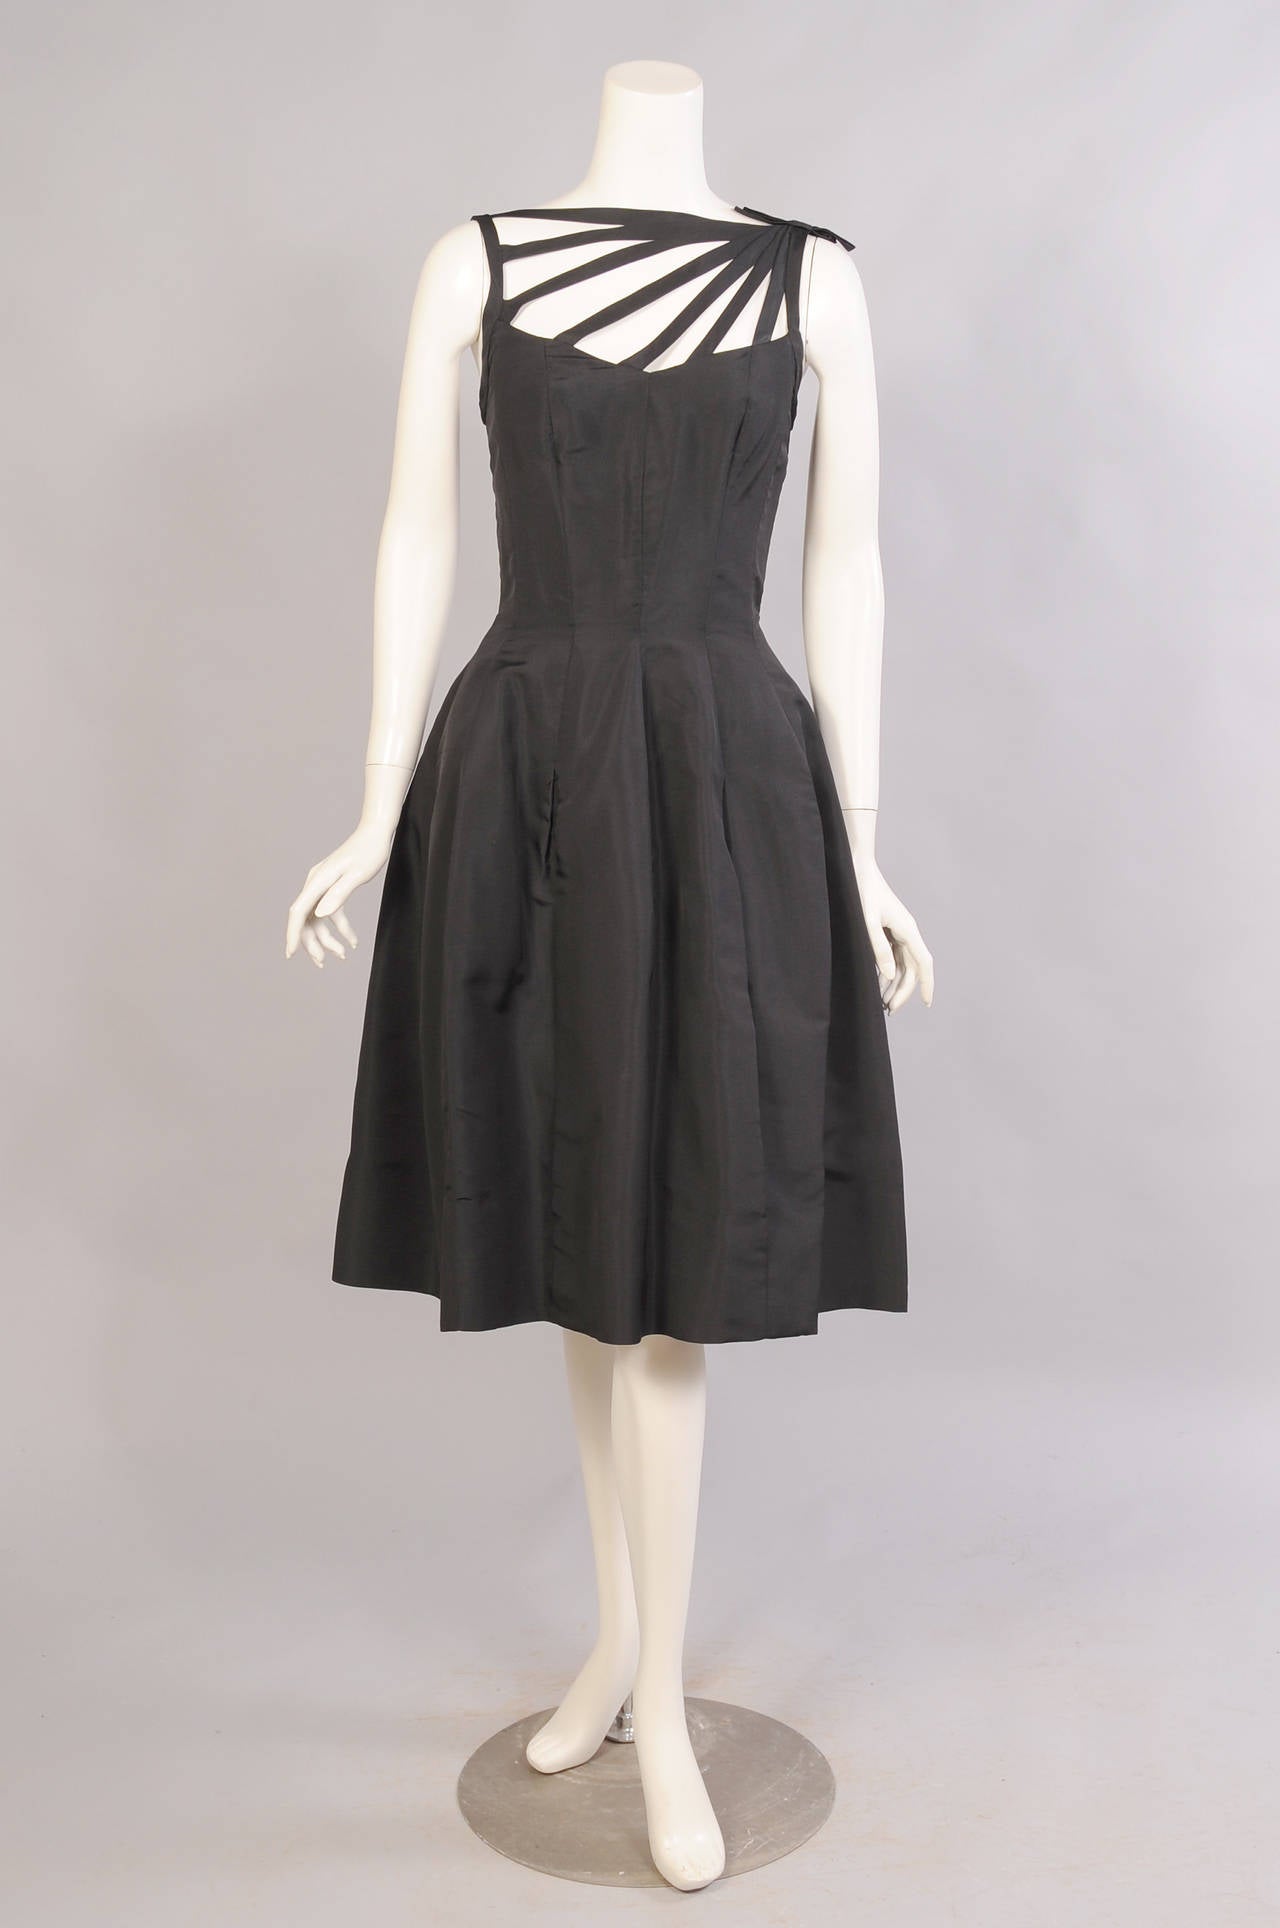 This chic black silk cocktail dress has a wonderful strappy treatment on the bodice with a flat bow on the left side. The bodice is boned for extra support. The full skirt has inverted pleats which create an interesting shape. There is a black net